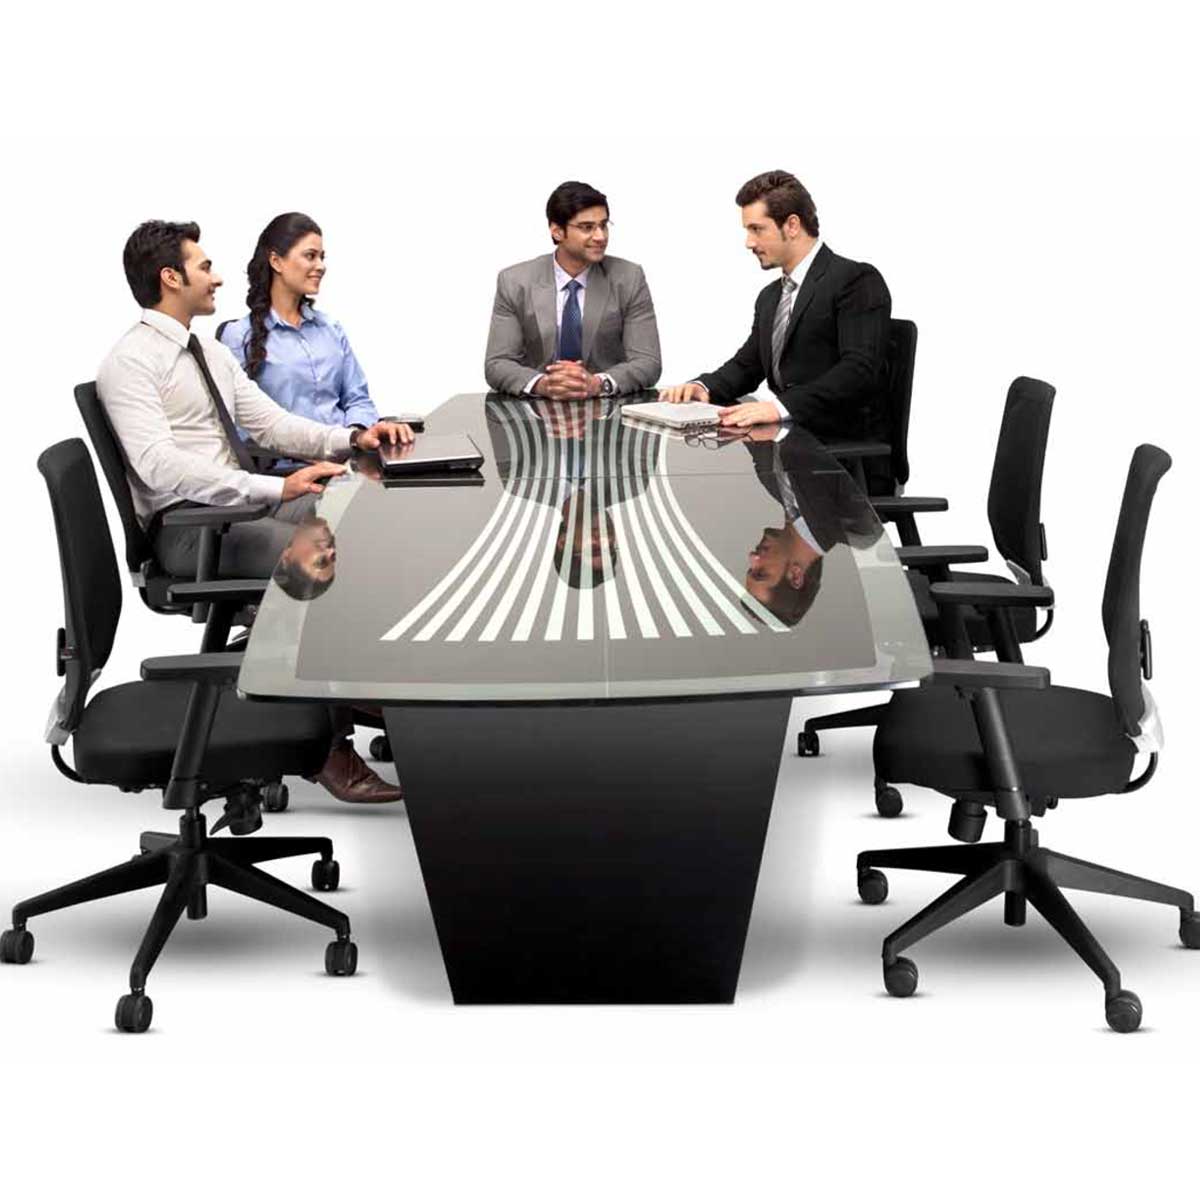 Metal Office Table Manufacturers, Suppliers in Ber Sarai